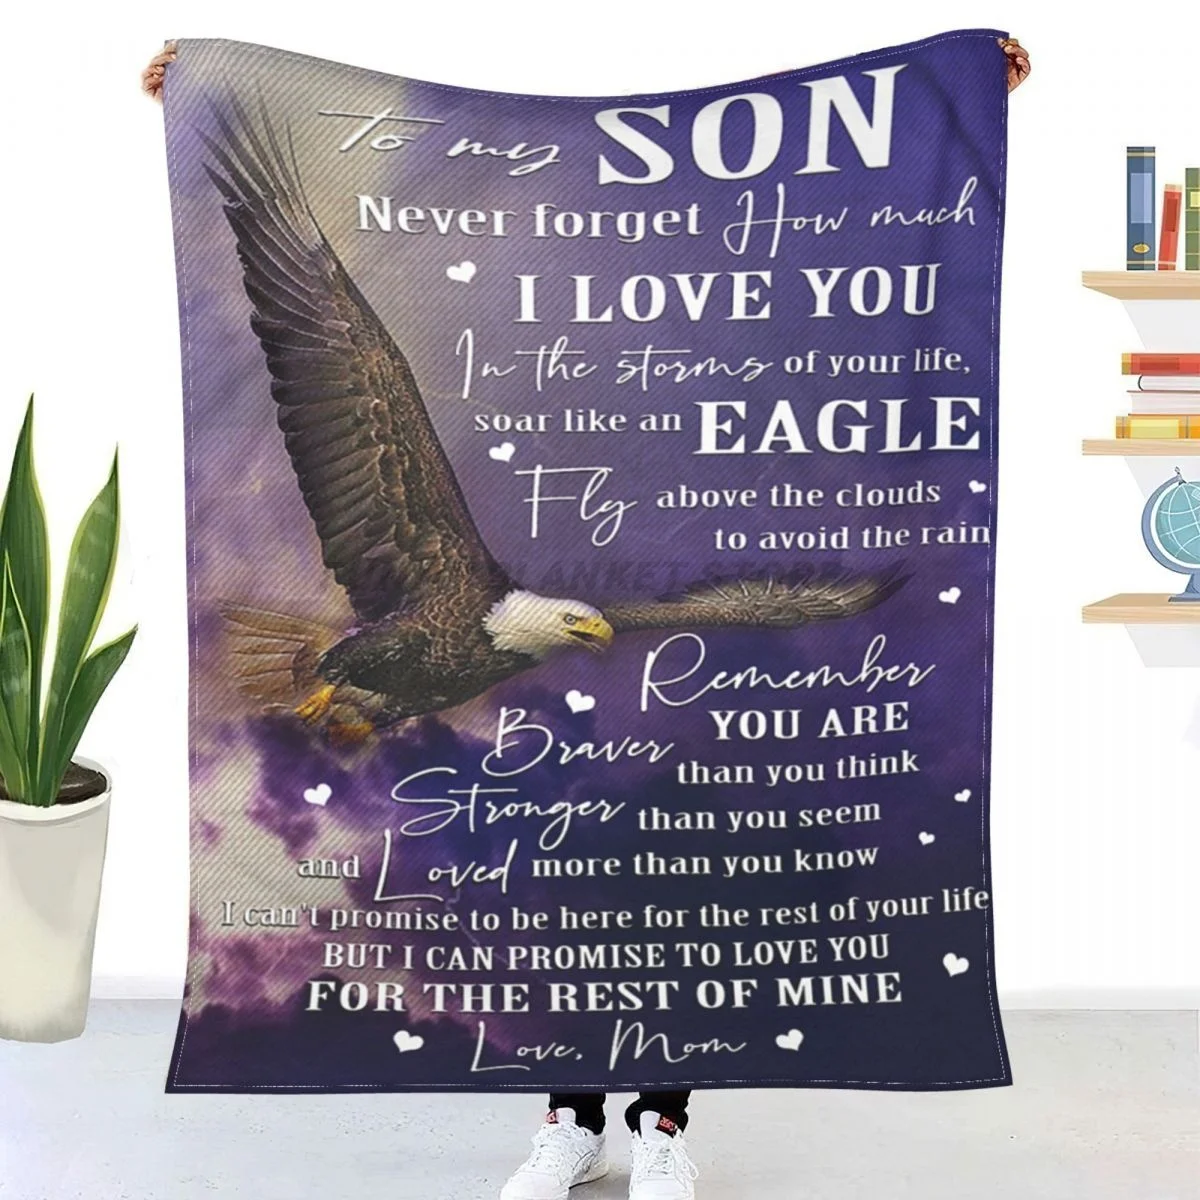 

I LOVE YOU ; PERFECT GIFT FOR SON FROM MOM Sherpa Blankets Ultra Soft Flannel Fleece Throw Blankets for Couch Sofa Bed